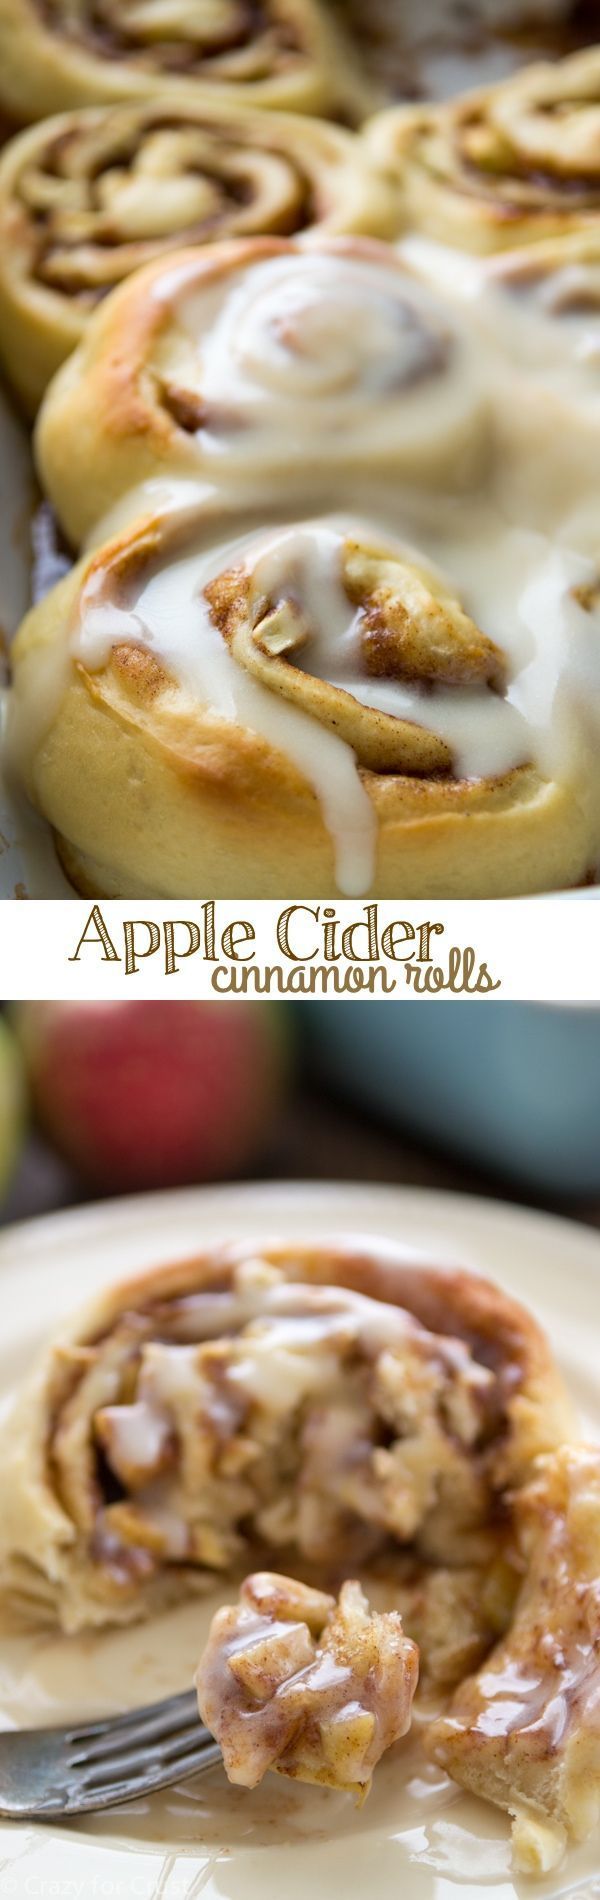 Apple Cider Cinnamon Rolls – apple cider in the dough and the glaze!